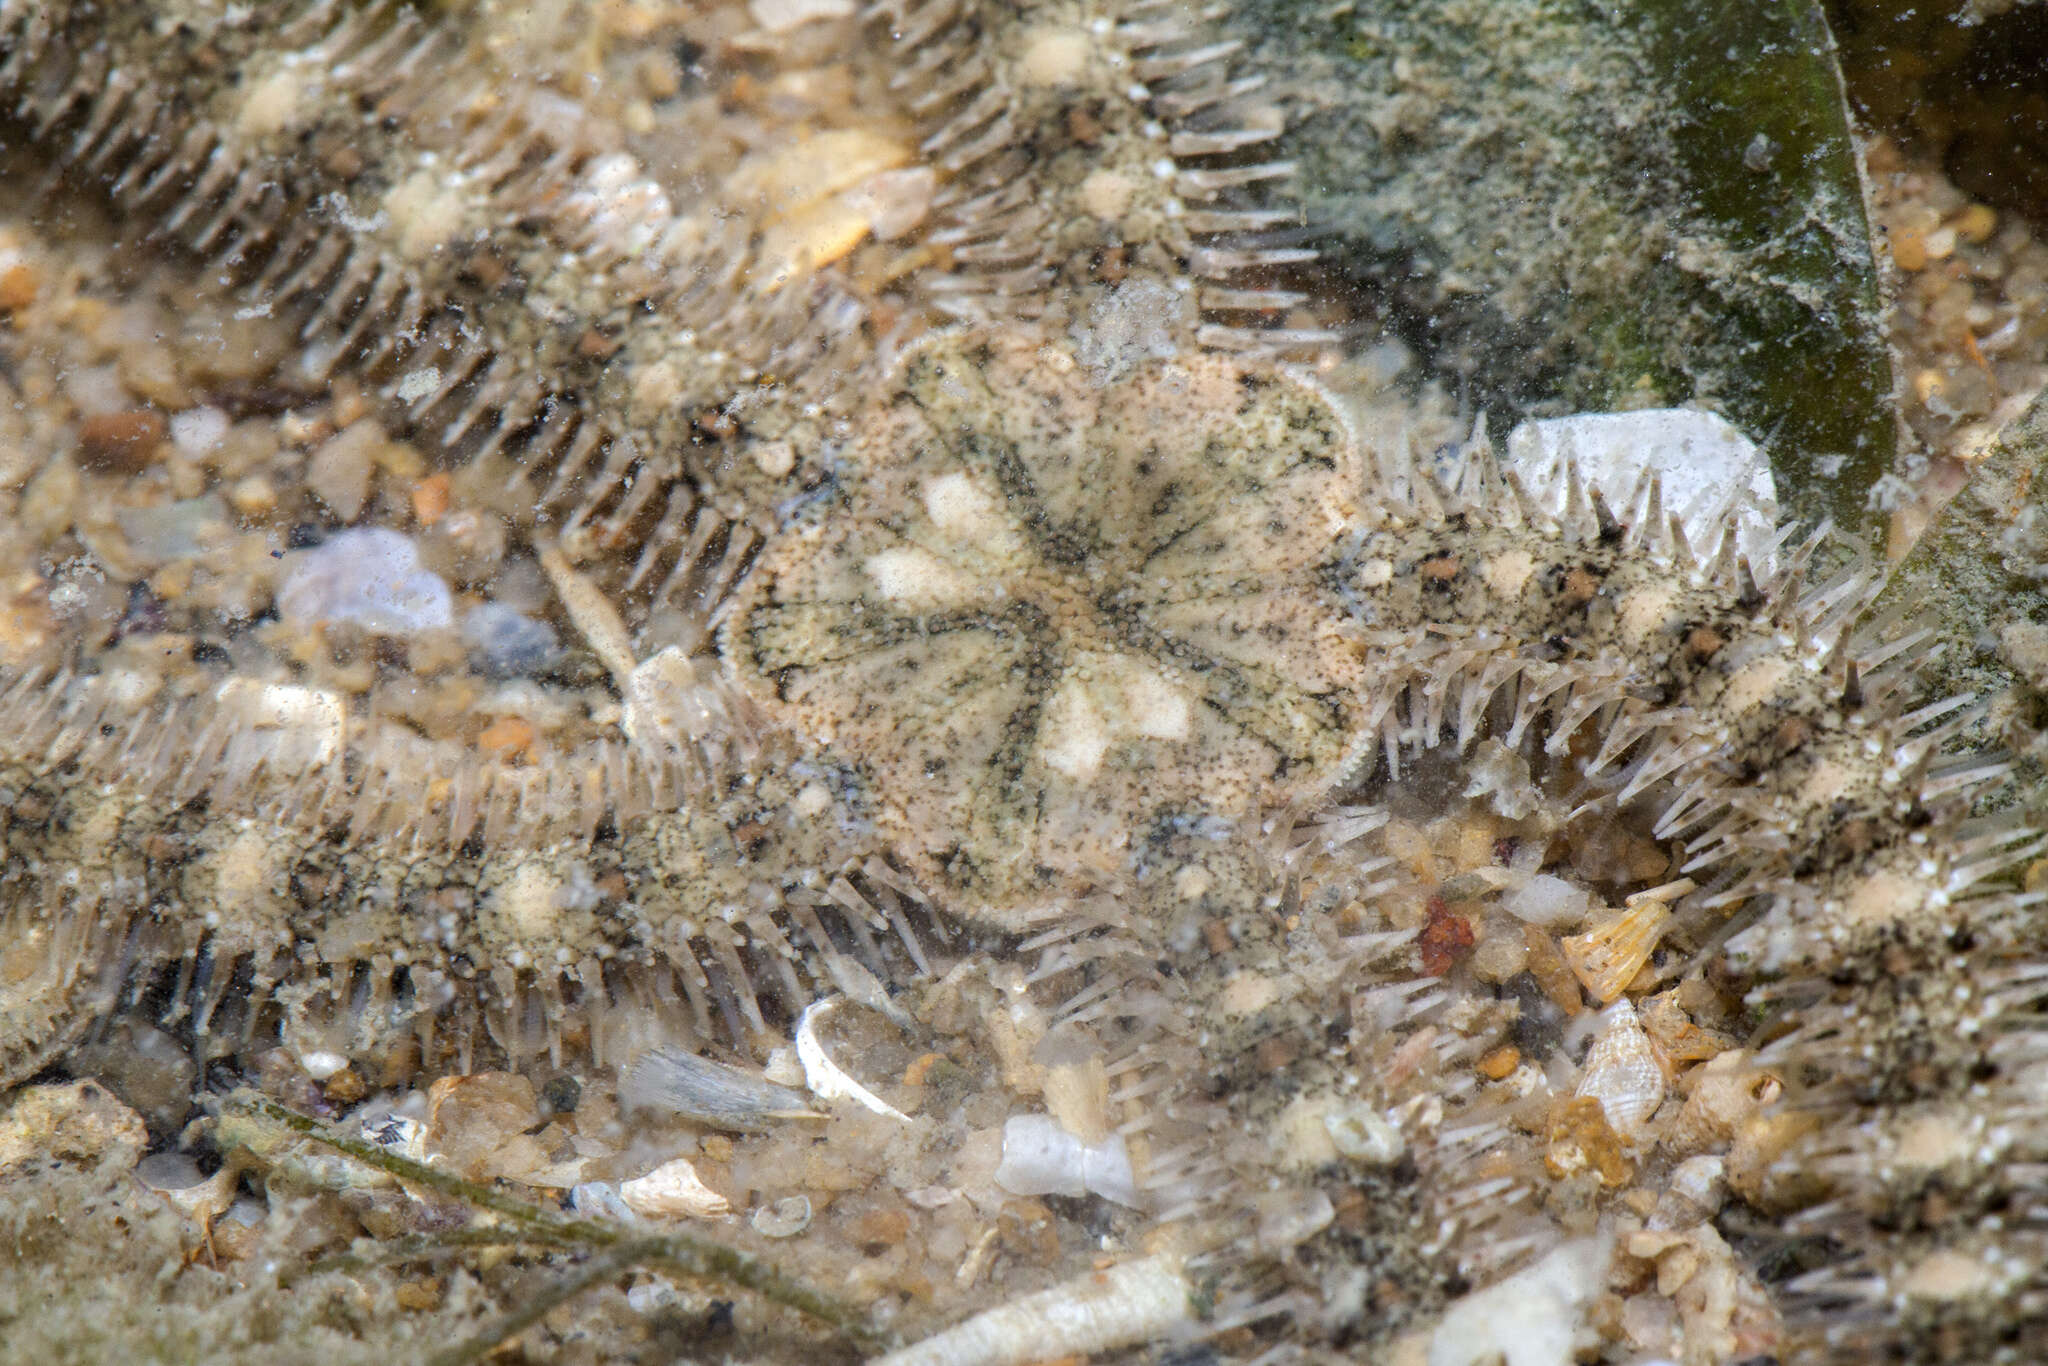 Image of Marbled Brittle Star